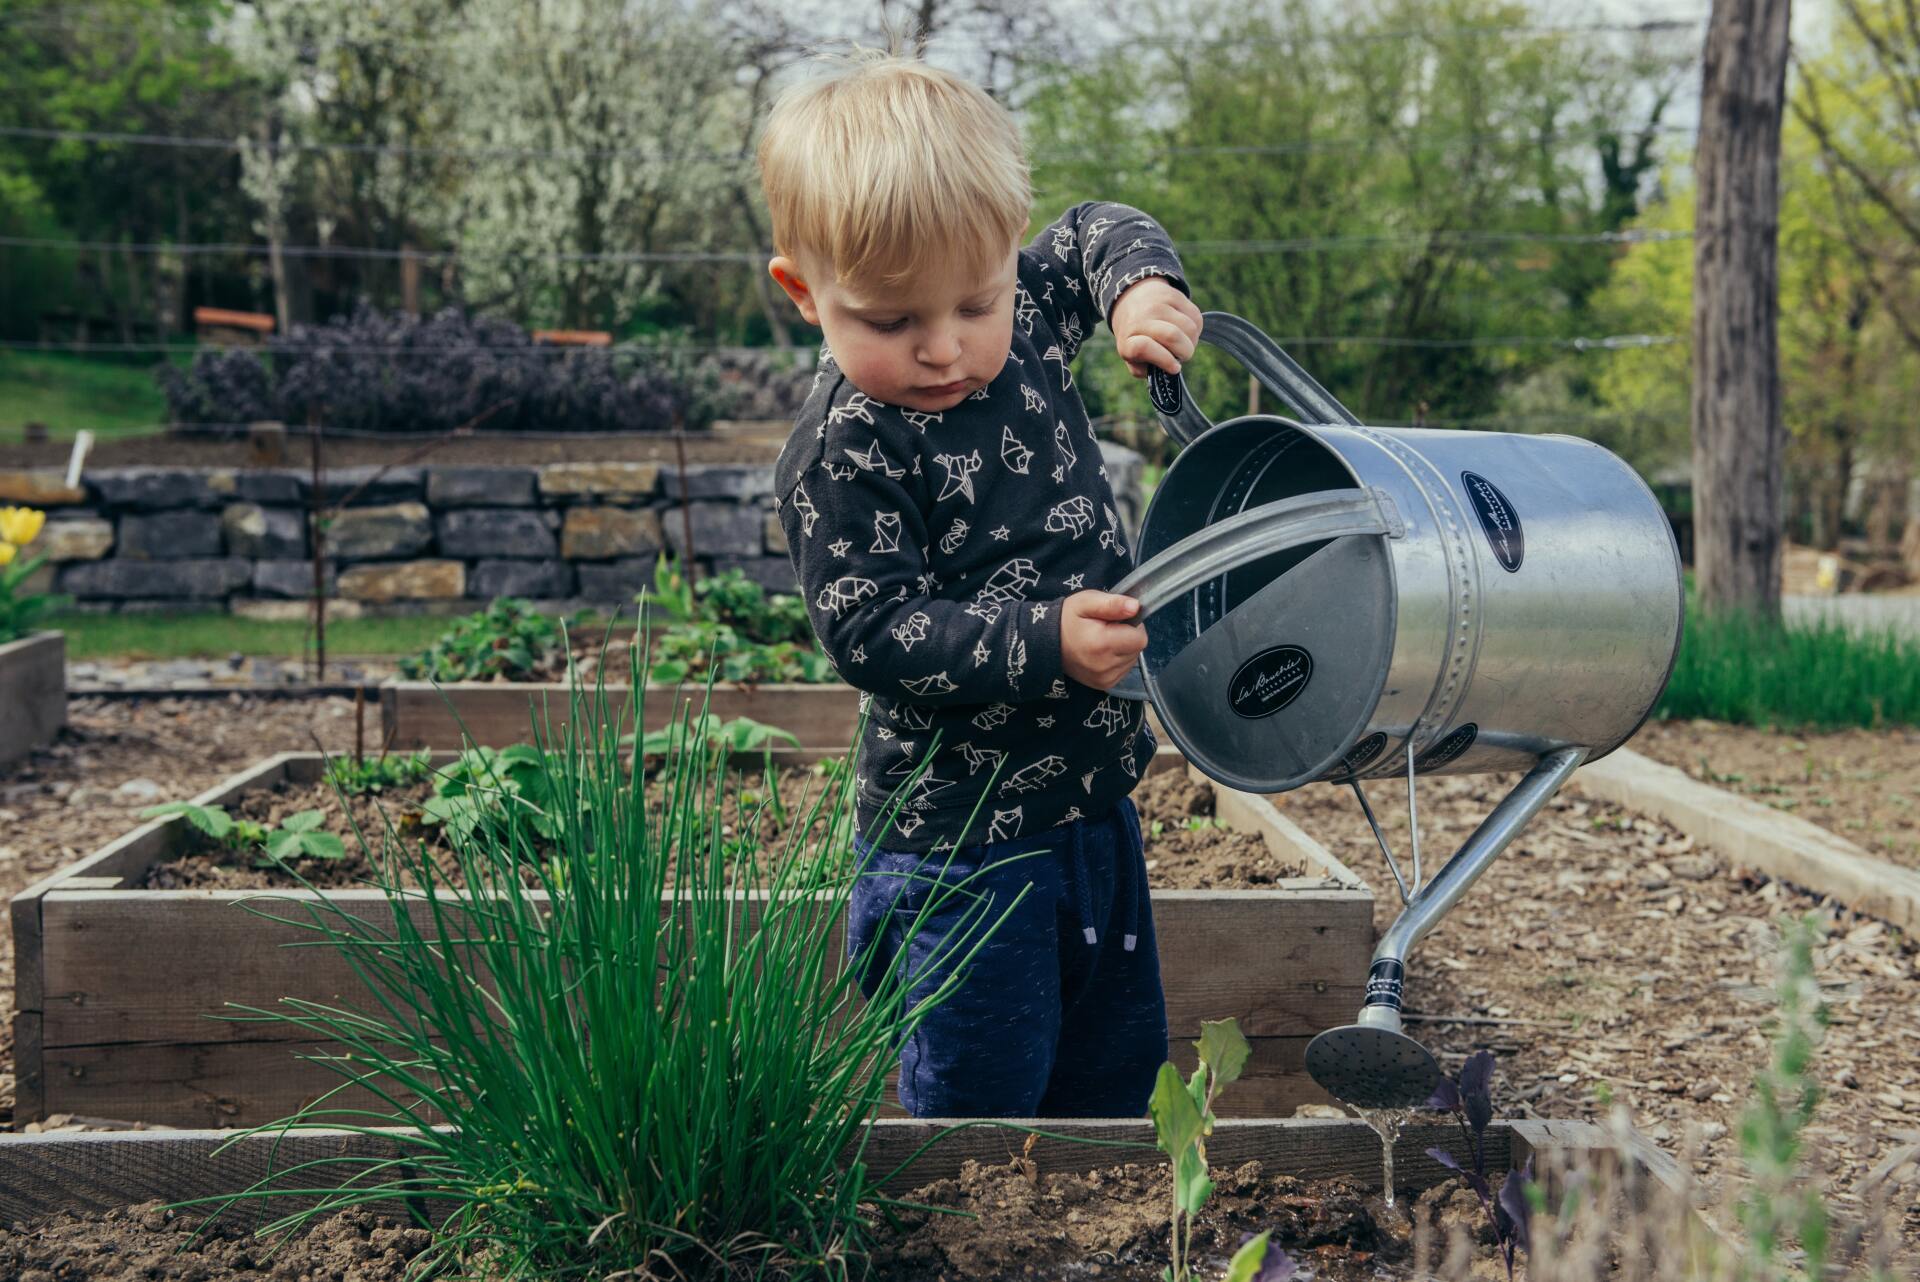 Young boy holding a large watering can over a vegetable garden.